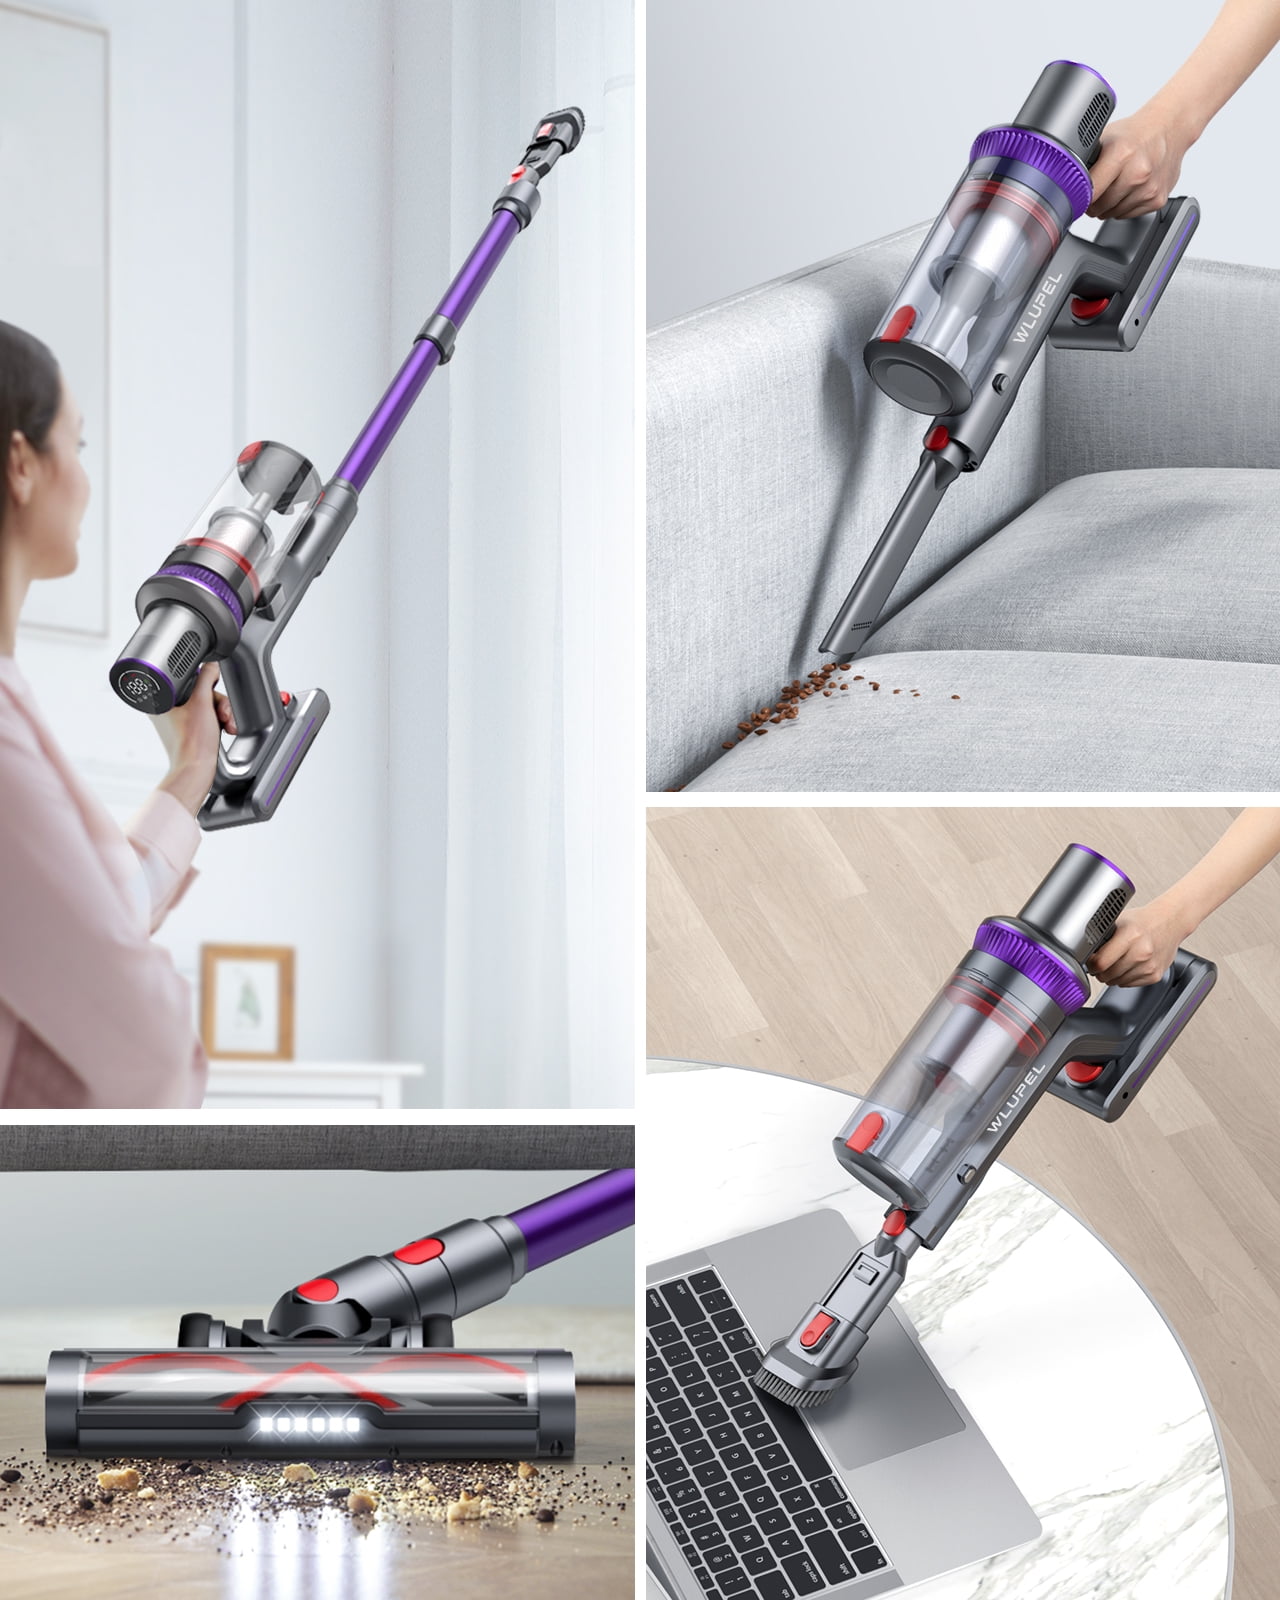 WLUPEL Cordless Vacuum Cleaner, Stick Vacuum Cleaner with 30KPA Powerful  Suction, 400W Lightweight Handheld Vacuum with LED Display for Hardwood  Floor